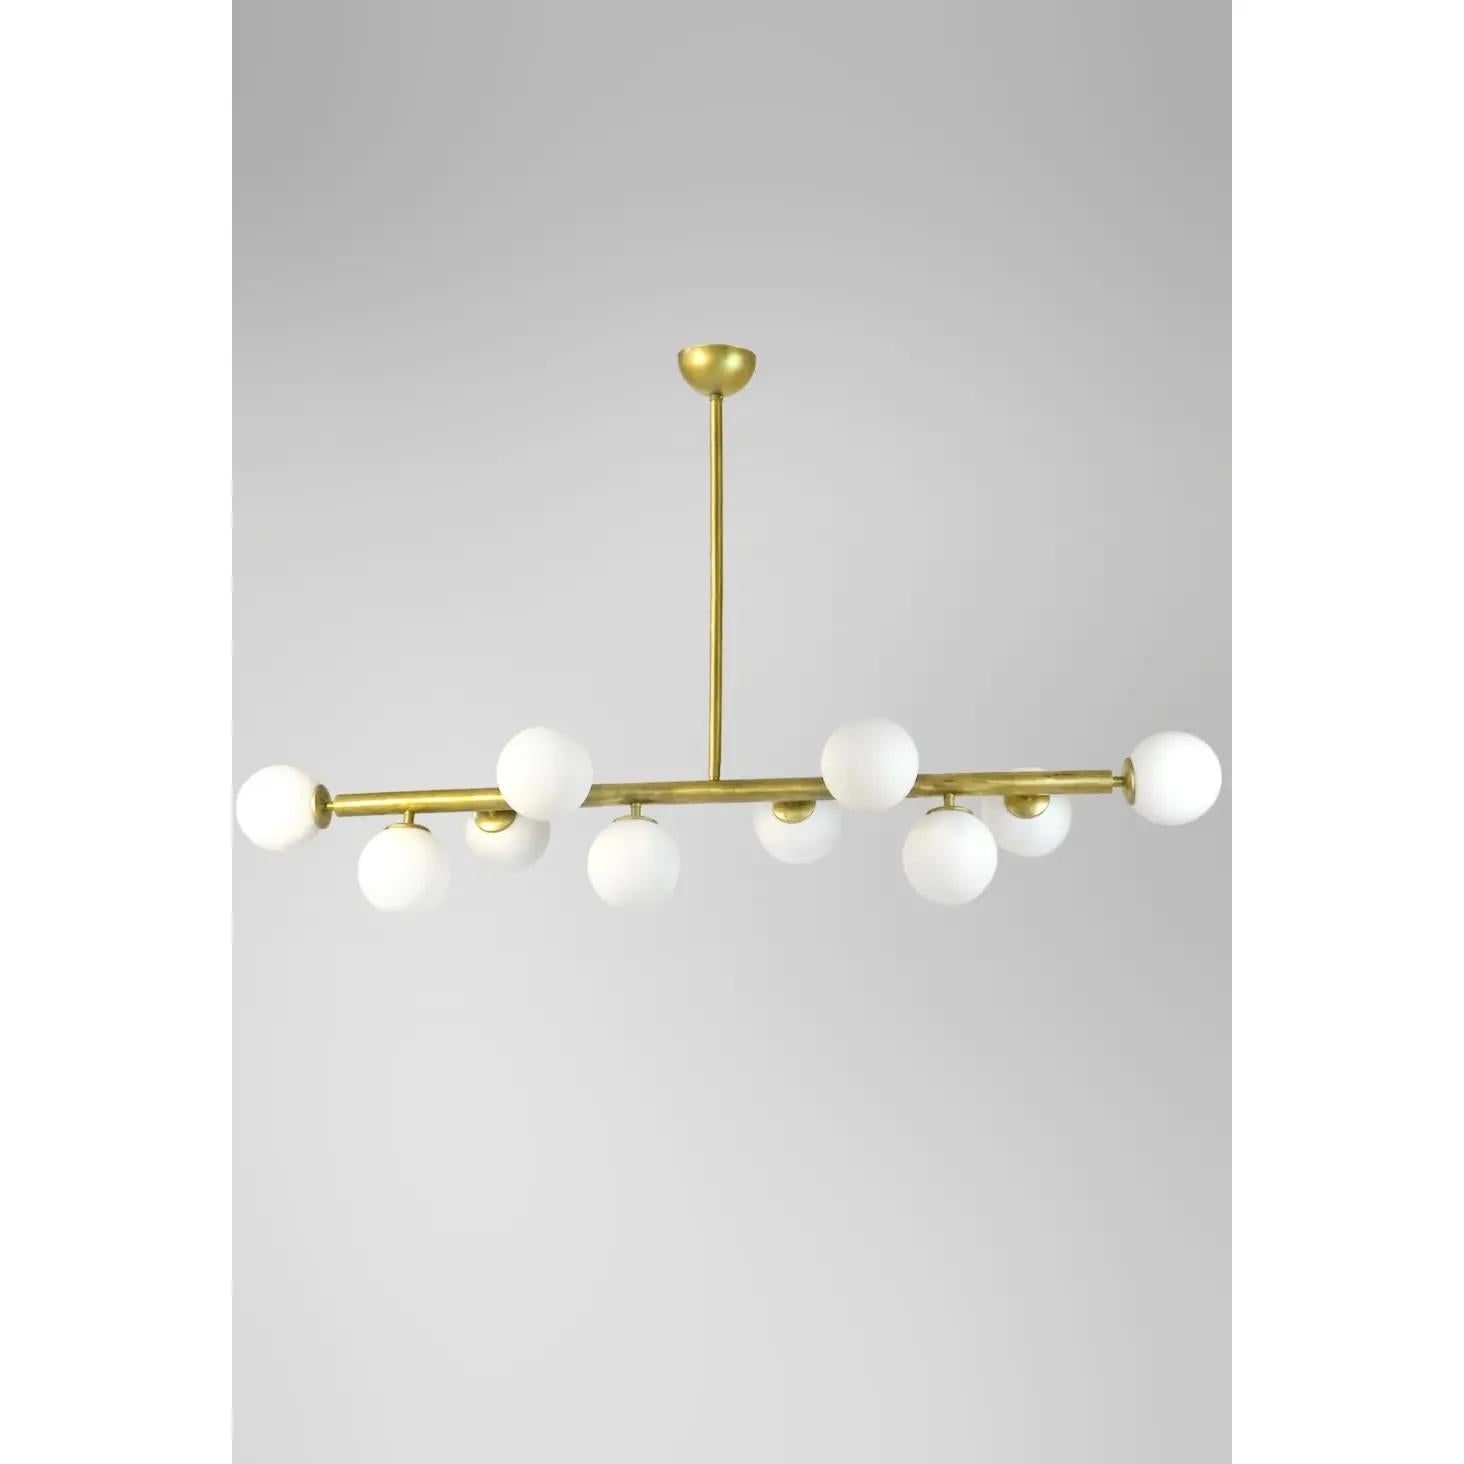 Italian mid-century style brass chandelier featuring 12 globes lights made of opaline glass on a brass vintage treated structure. 

This chandelier listing is for a 12 globes light. Also 16 globes available, please inquire for pricing. 

This